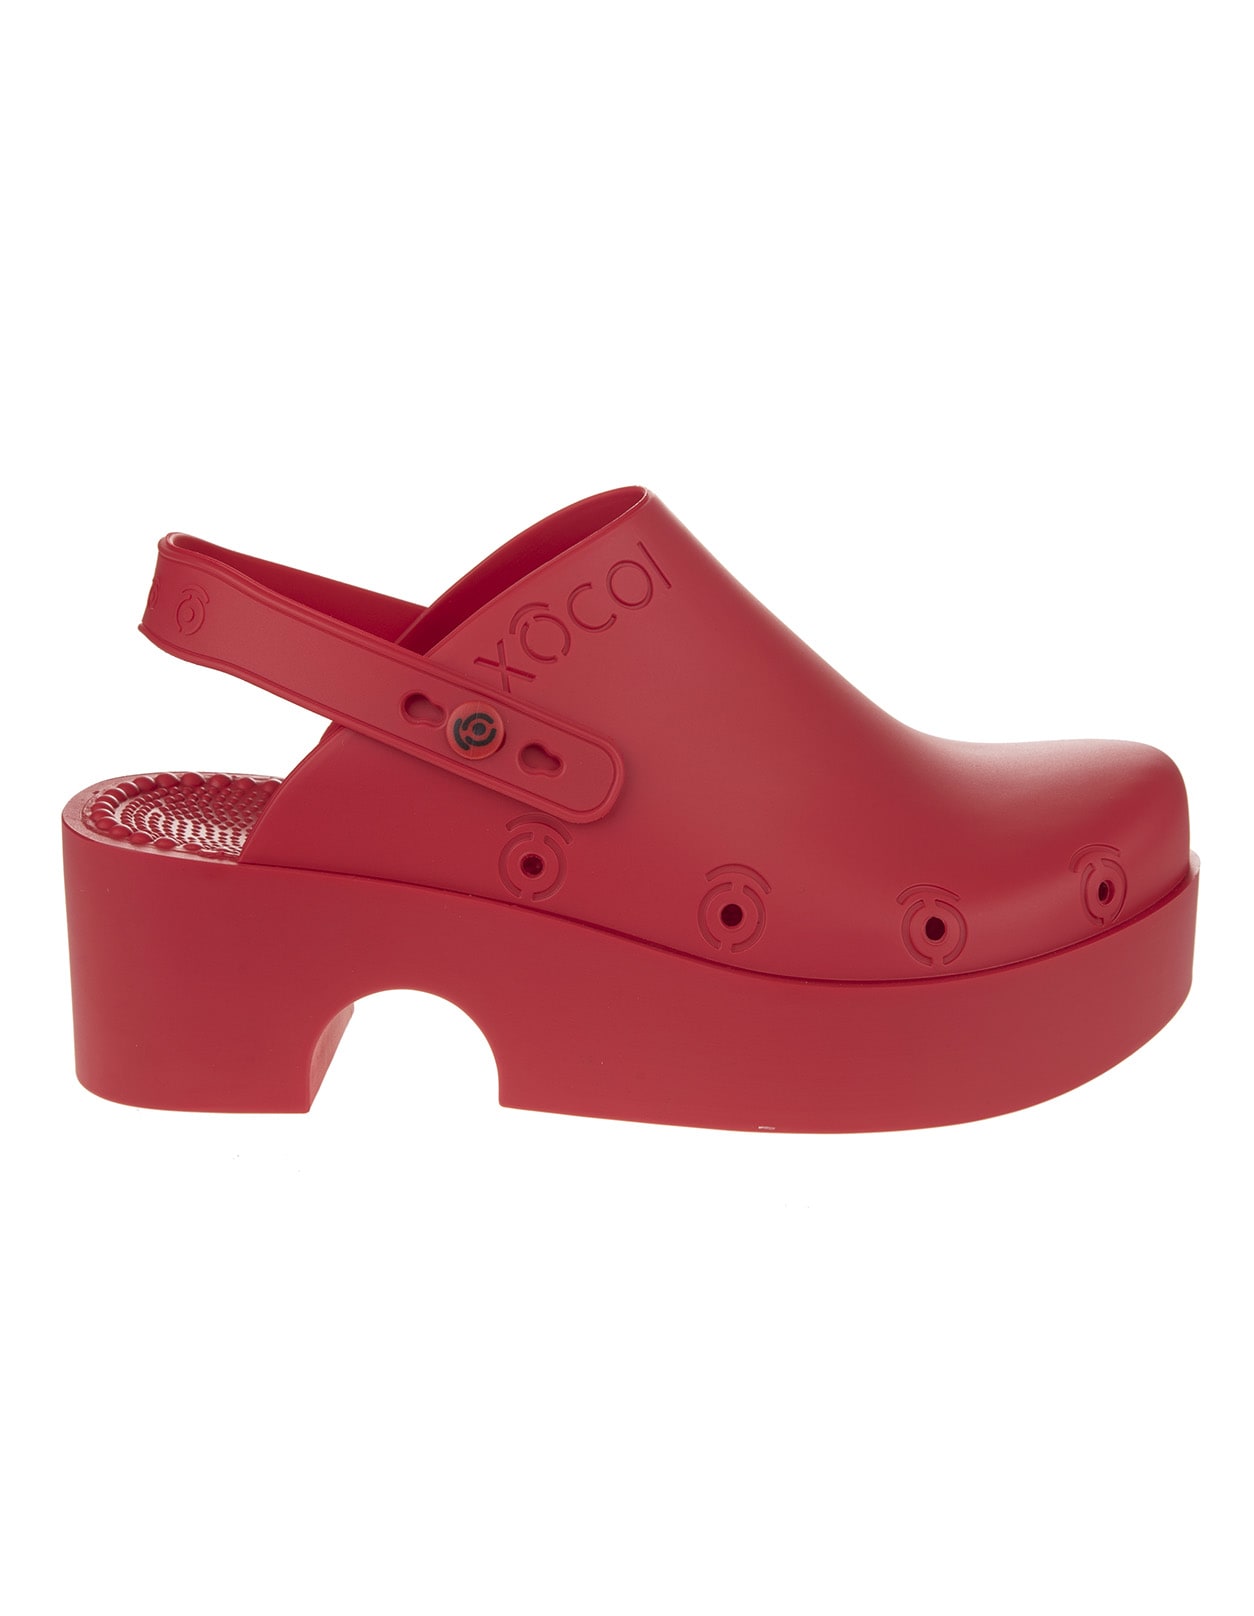 Xocoi Woman Slides In Red Recycled Rubber With Logo